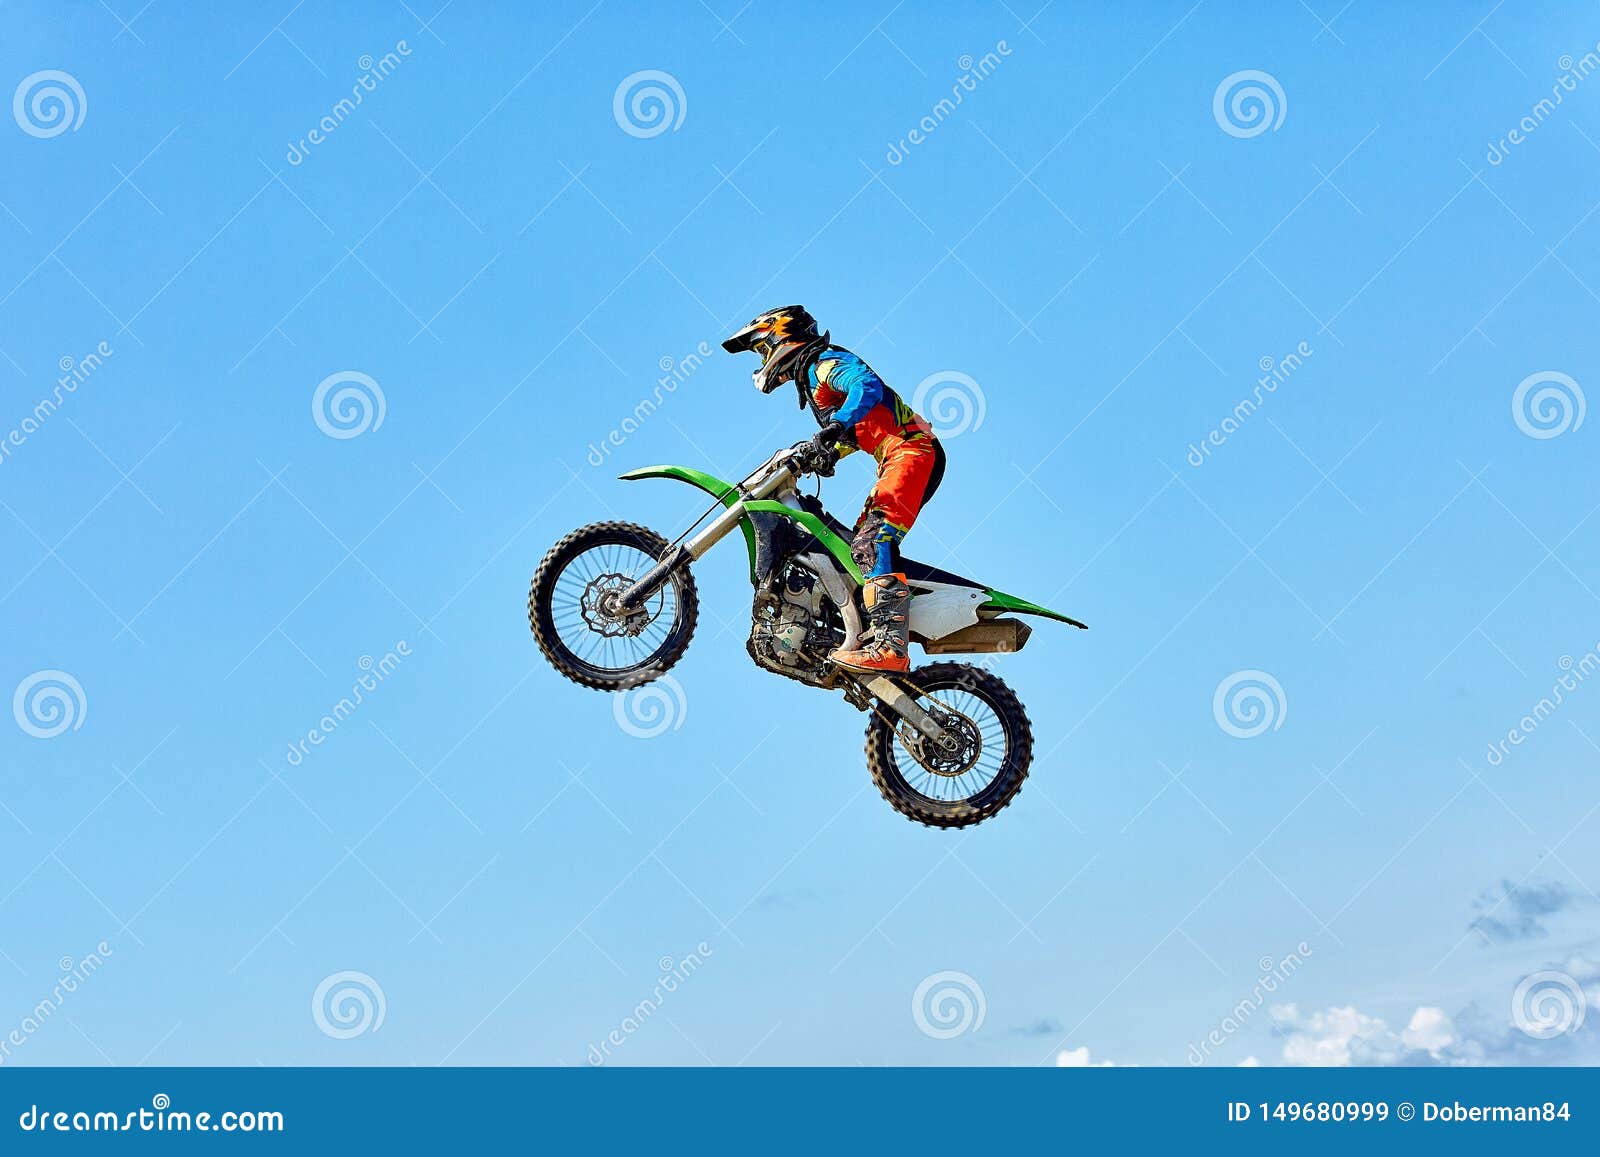 extreme sports, motorcycle jumping. motorcyclist makes an extreme jump against the sky.